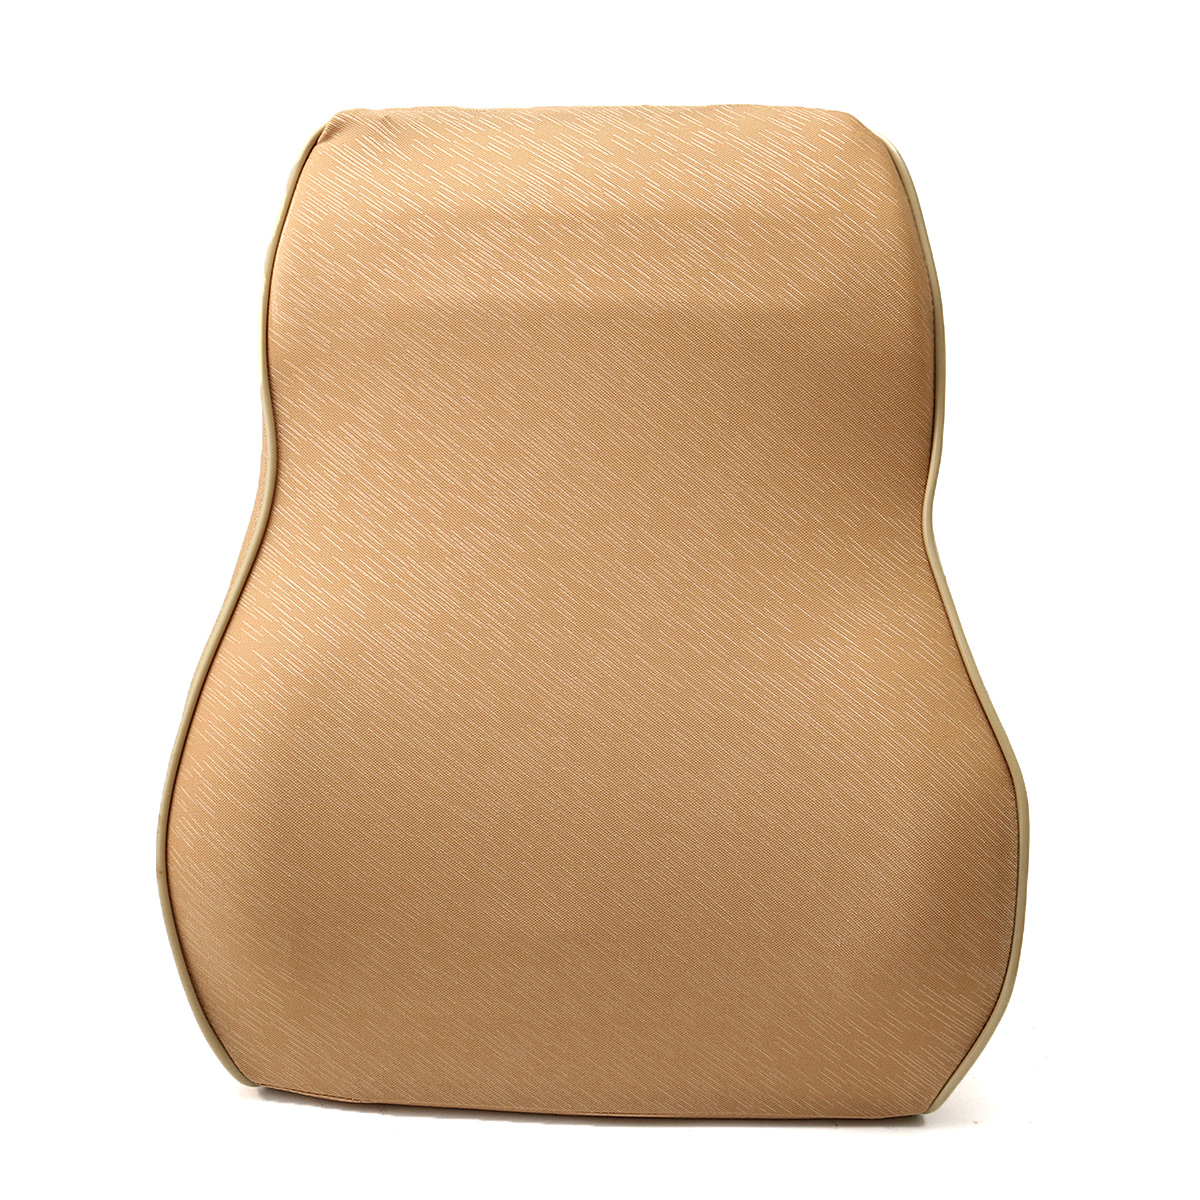 Memory-Foam-Lumbar-Back-Support-Cushion-Office-Car-Household-Pressure-Pain-Relief-Pillow-1153858